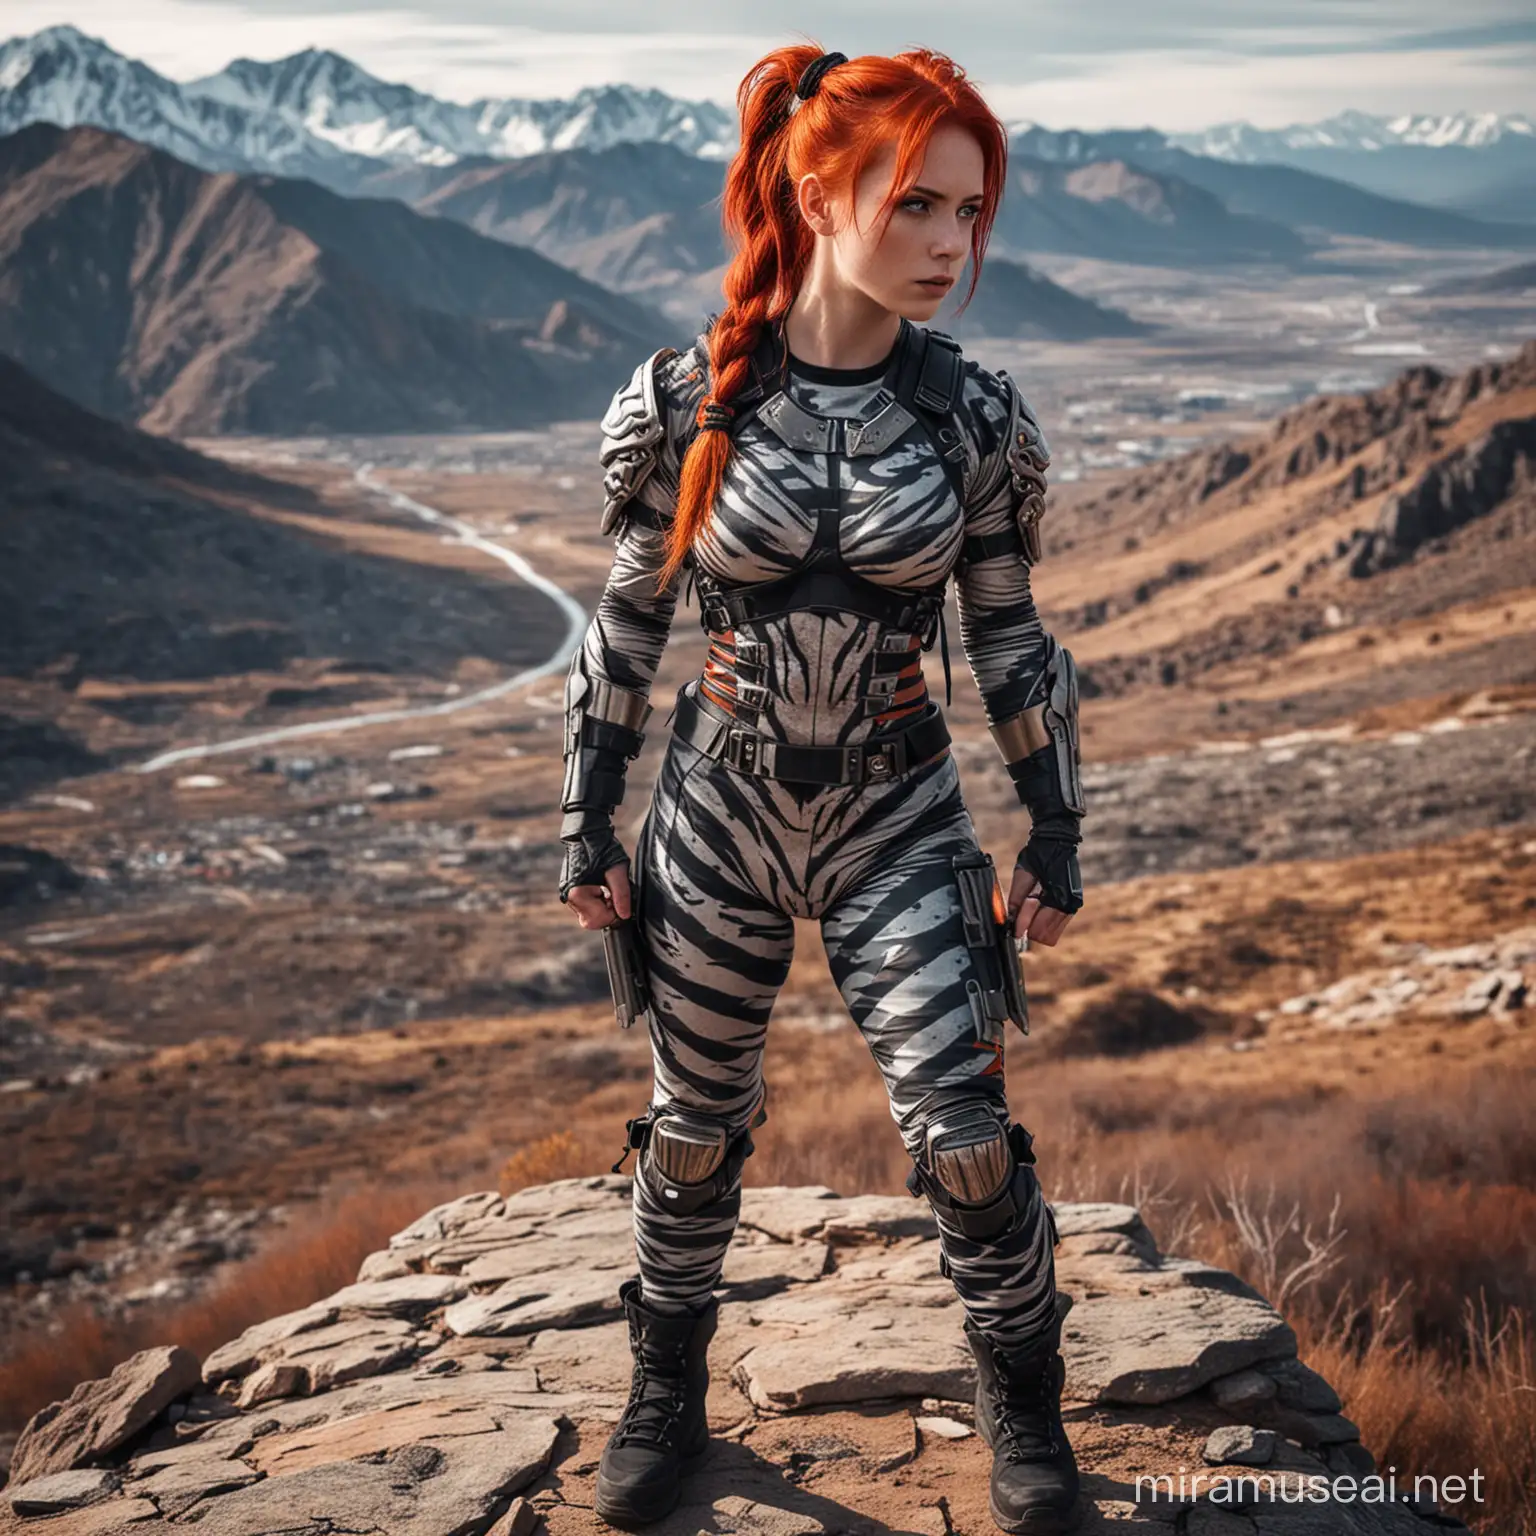 RedHaired Female Future Warrior on Mountain Top Ready to Pounce